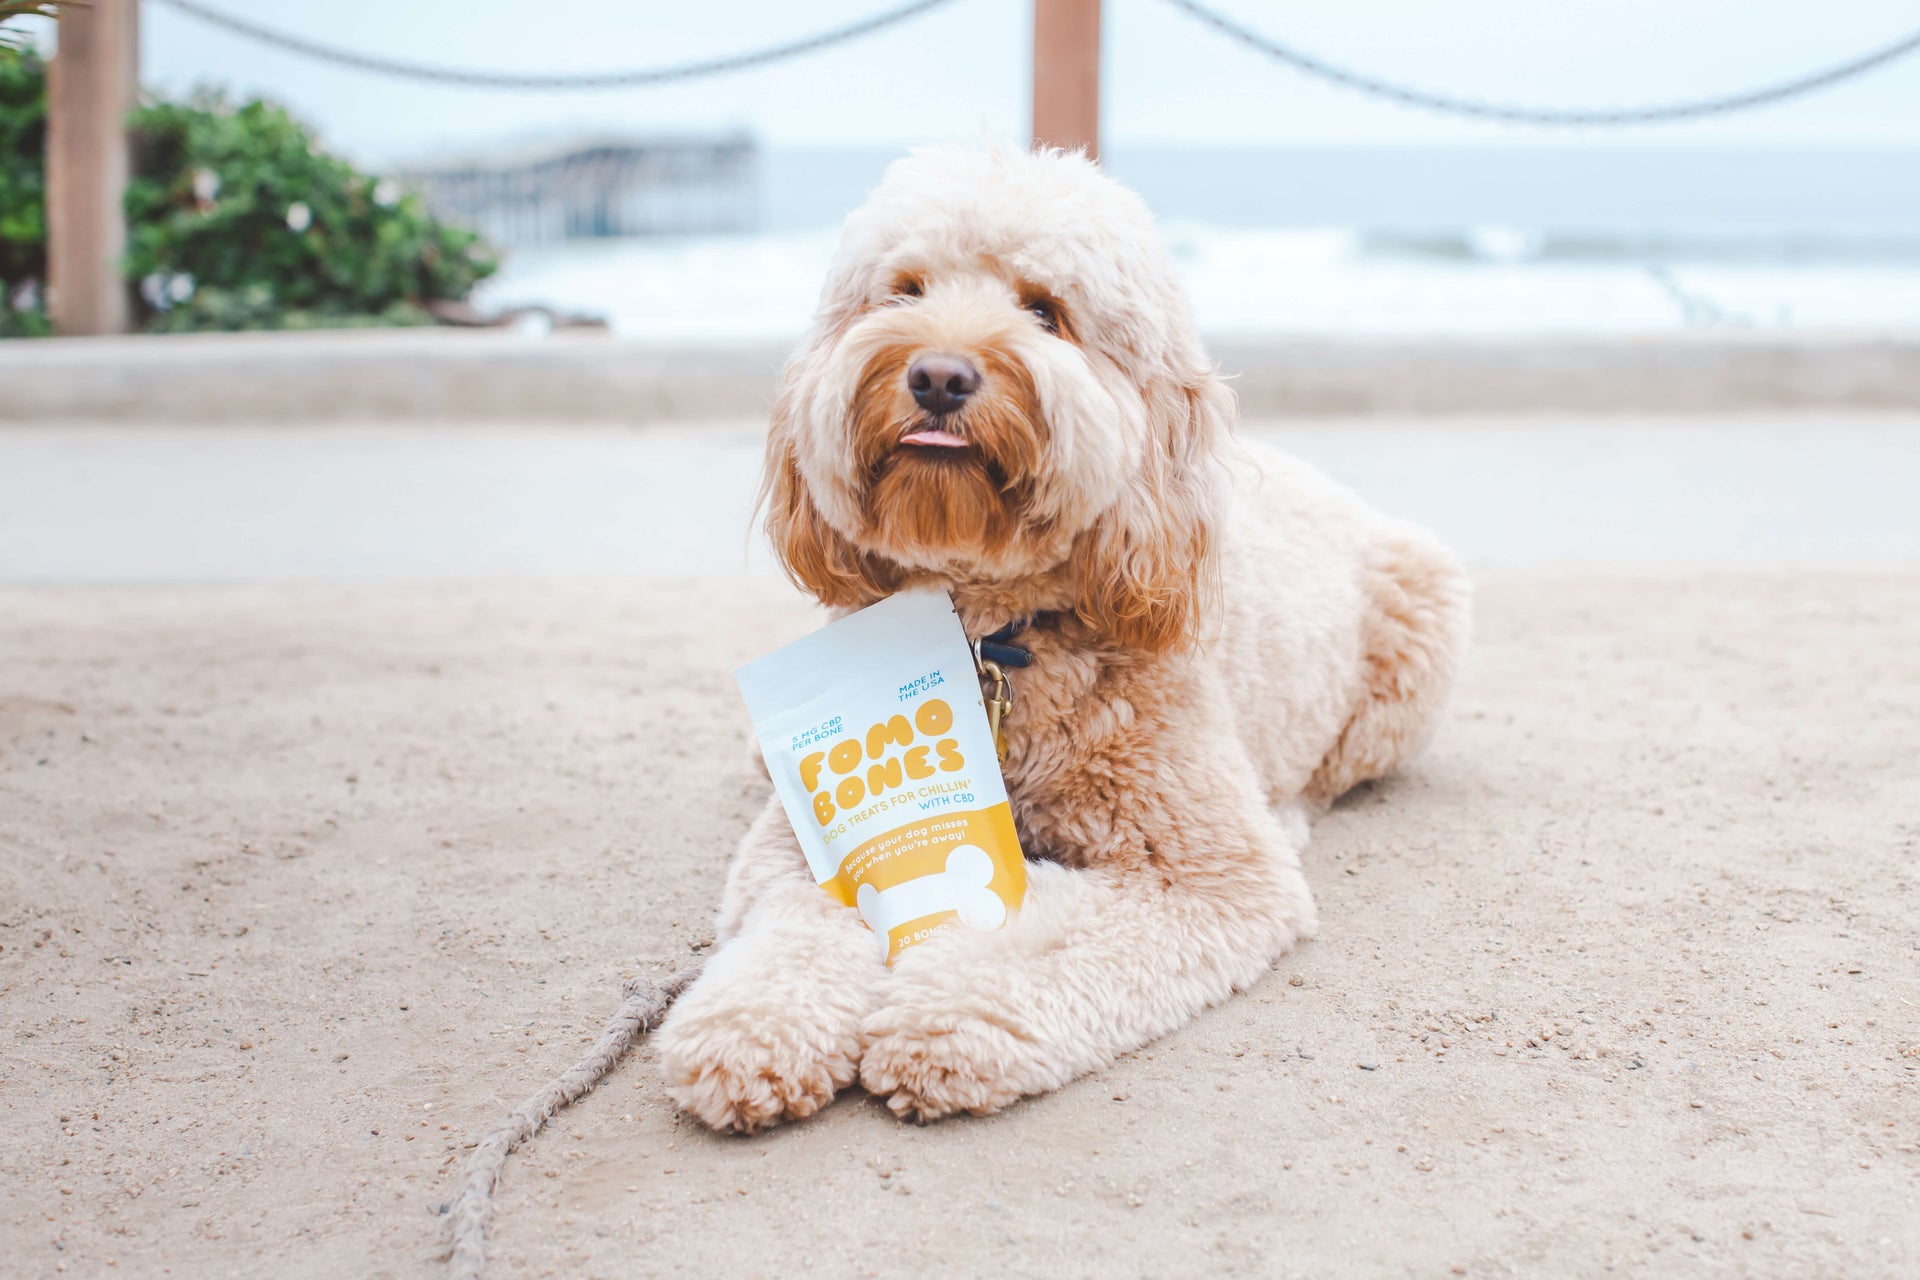 Sunday Scaries FOMO Bones CBD dog treats allow your dog to remain calm in public areas, like the beach